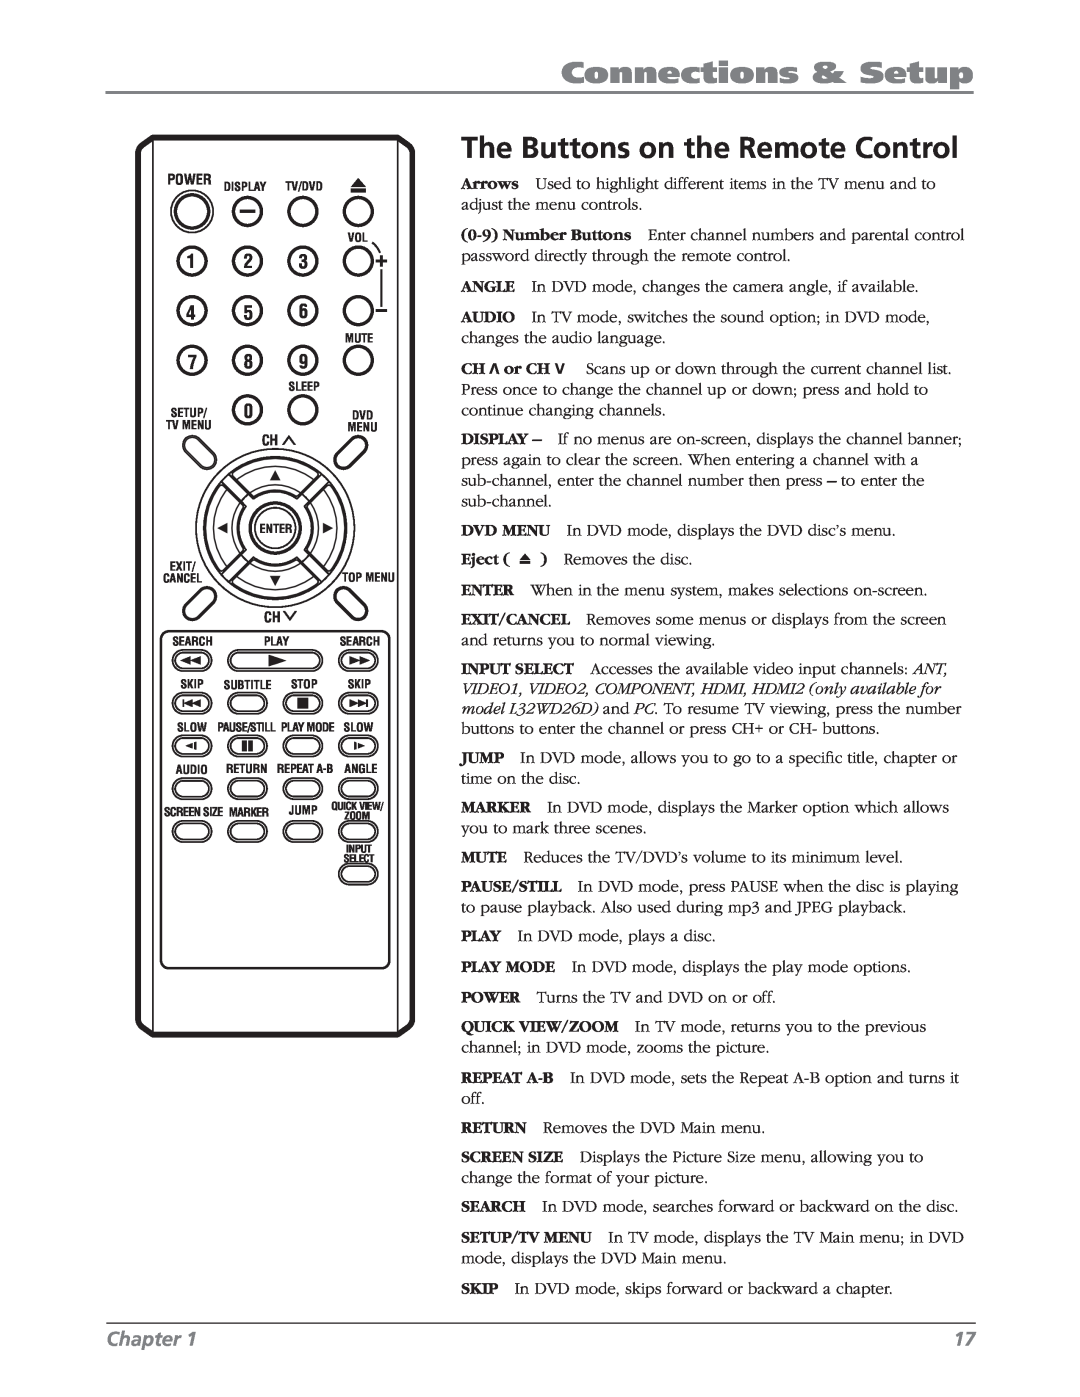 RCA L26WD26D warranty The Buttons on the Remote Control, Connections & Setup, Chapter 